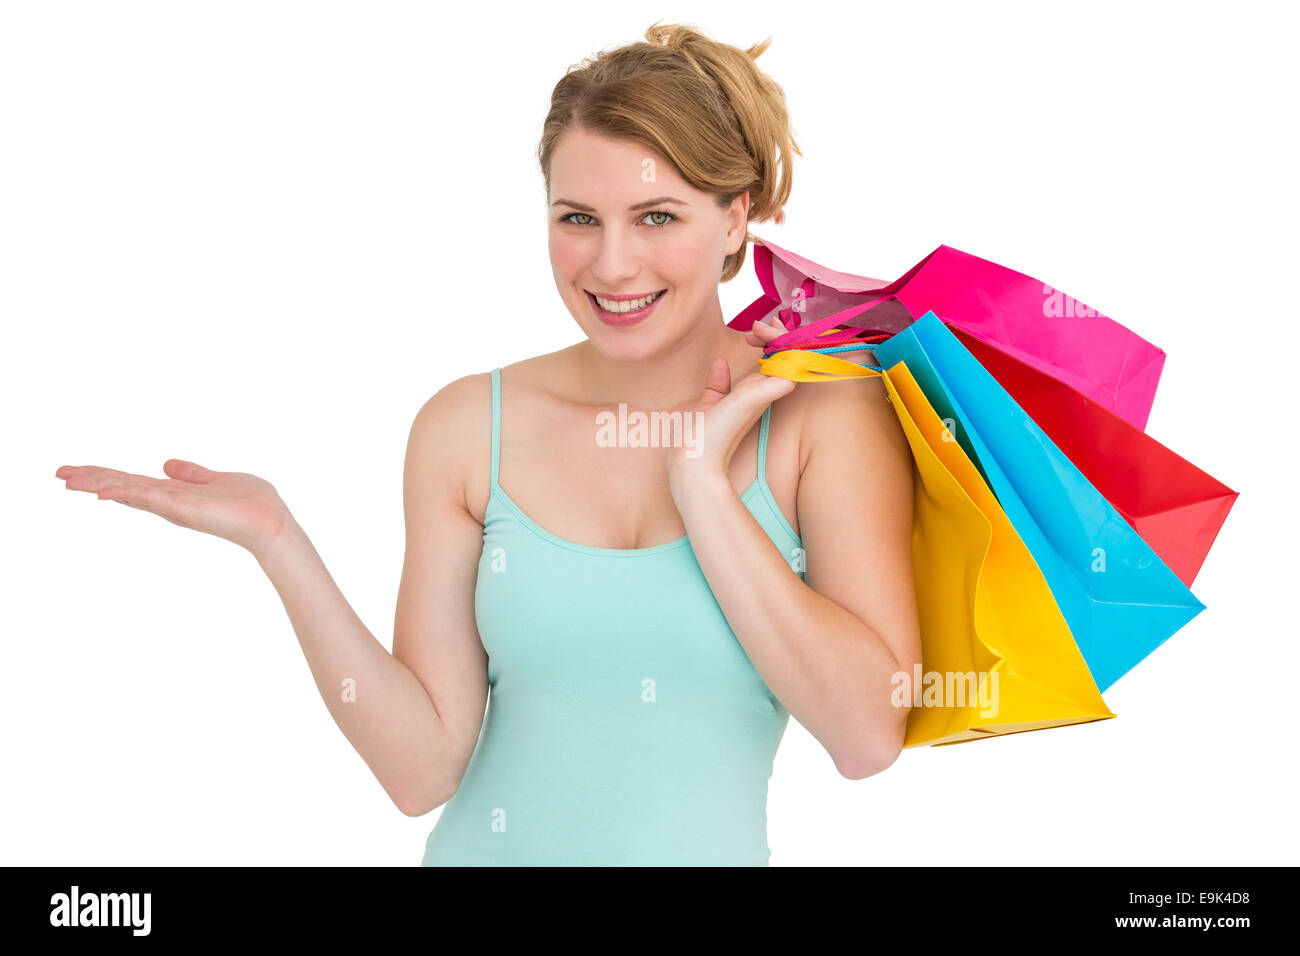 Smiling woman presenting while holding shopping bags Stock Photo